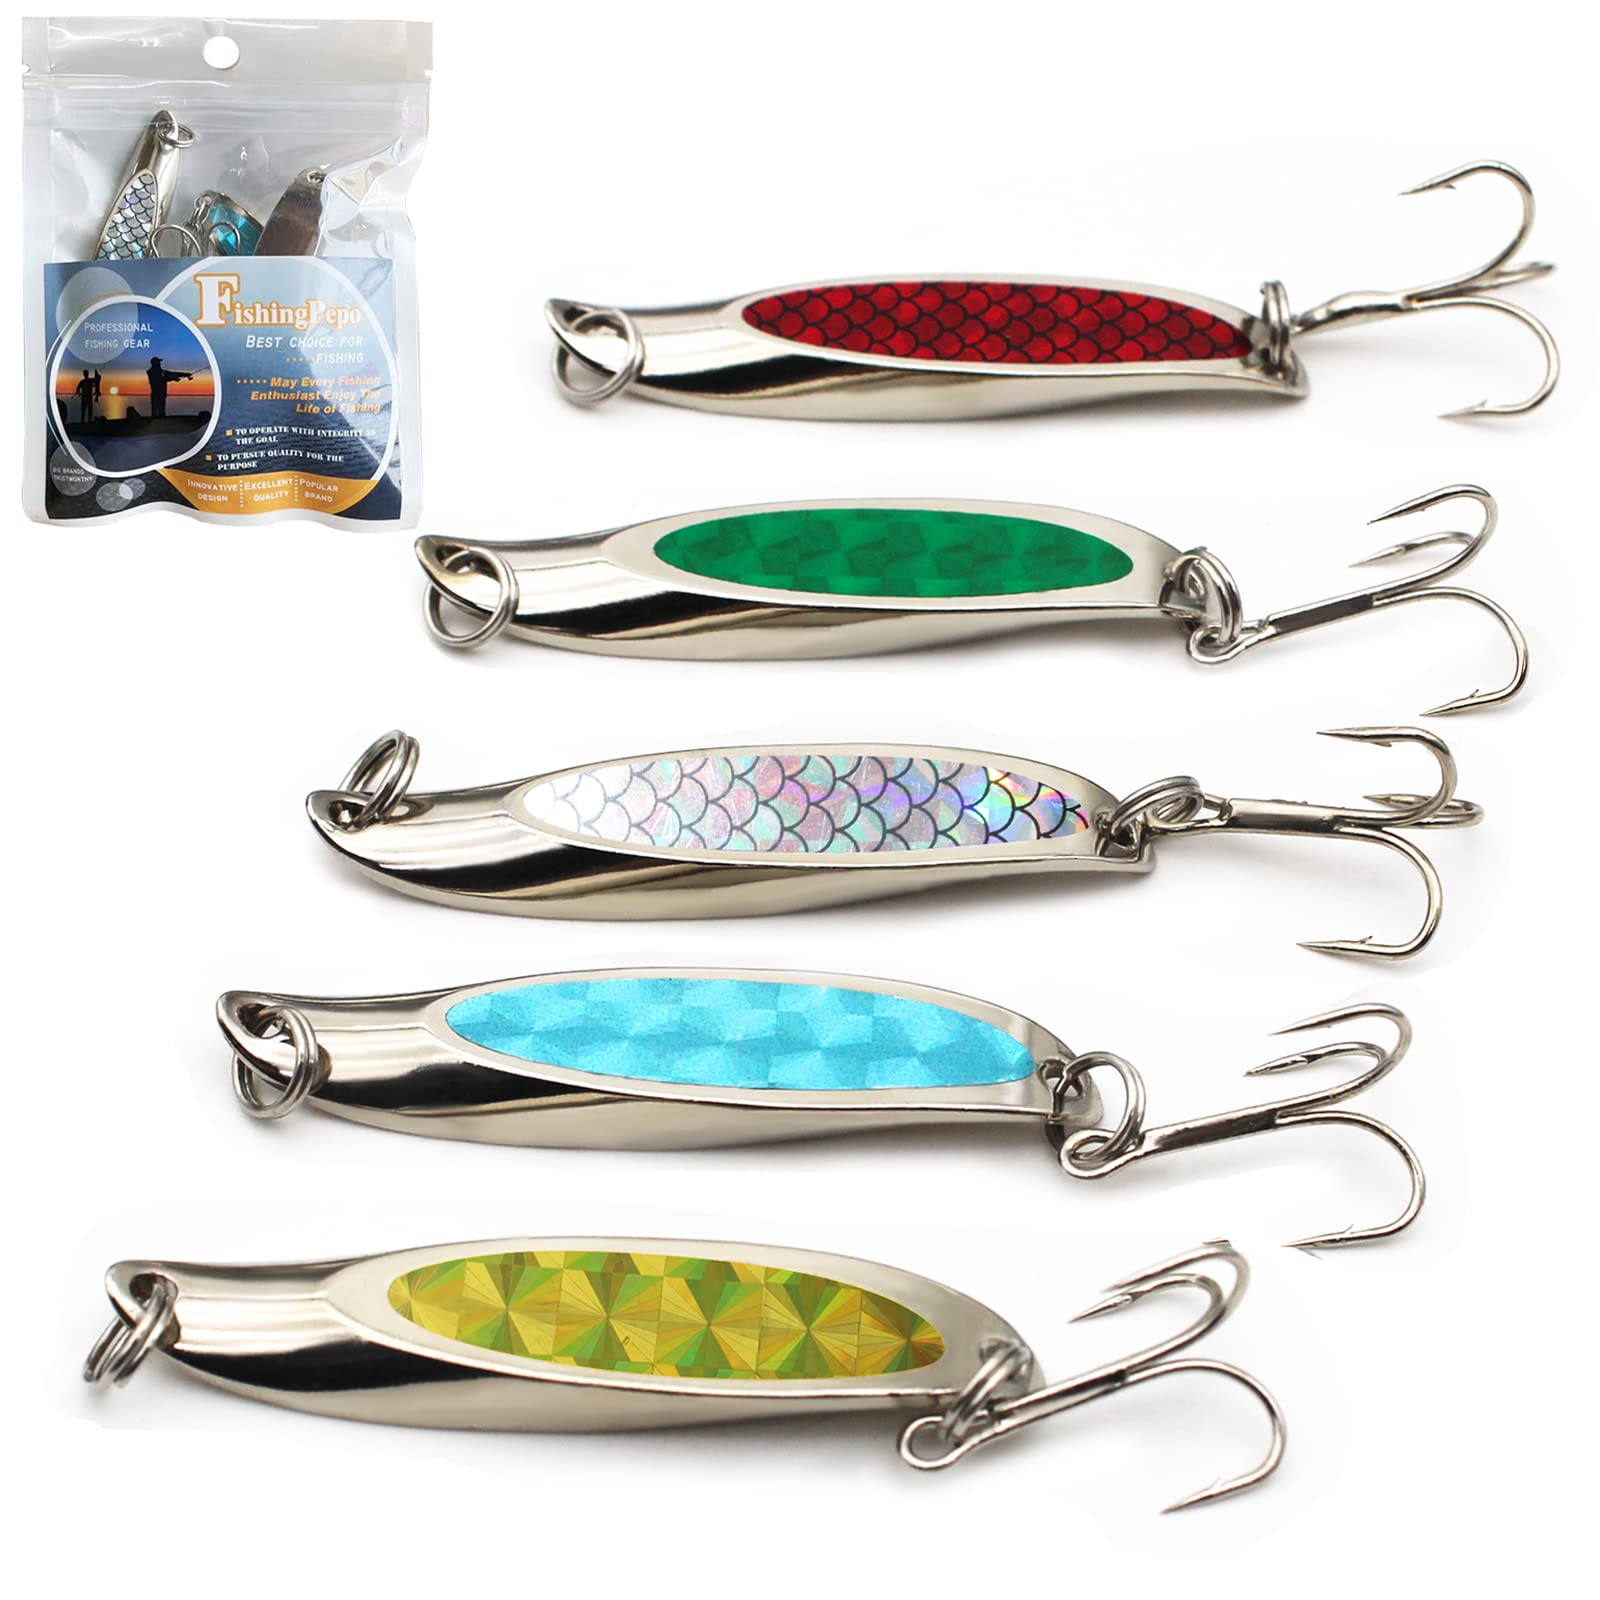 An Excellent Fishing Hook for Bait or Lures 